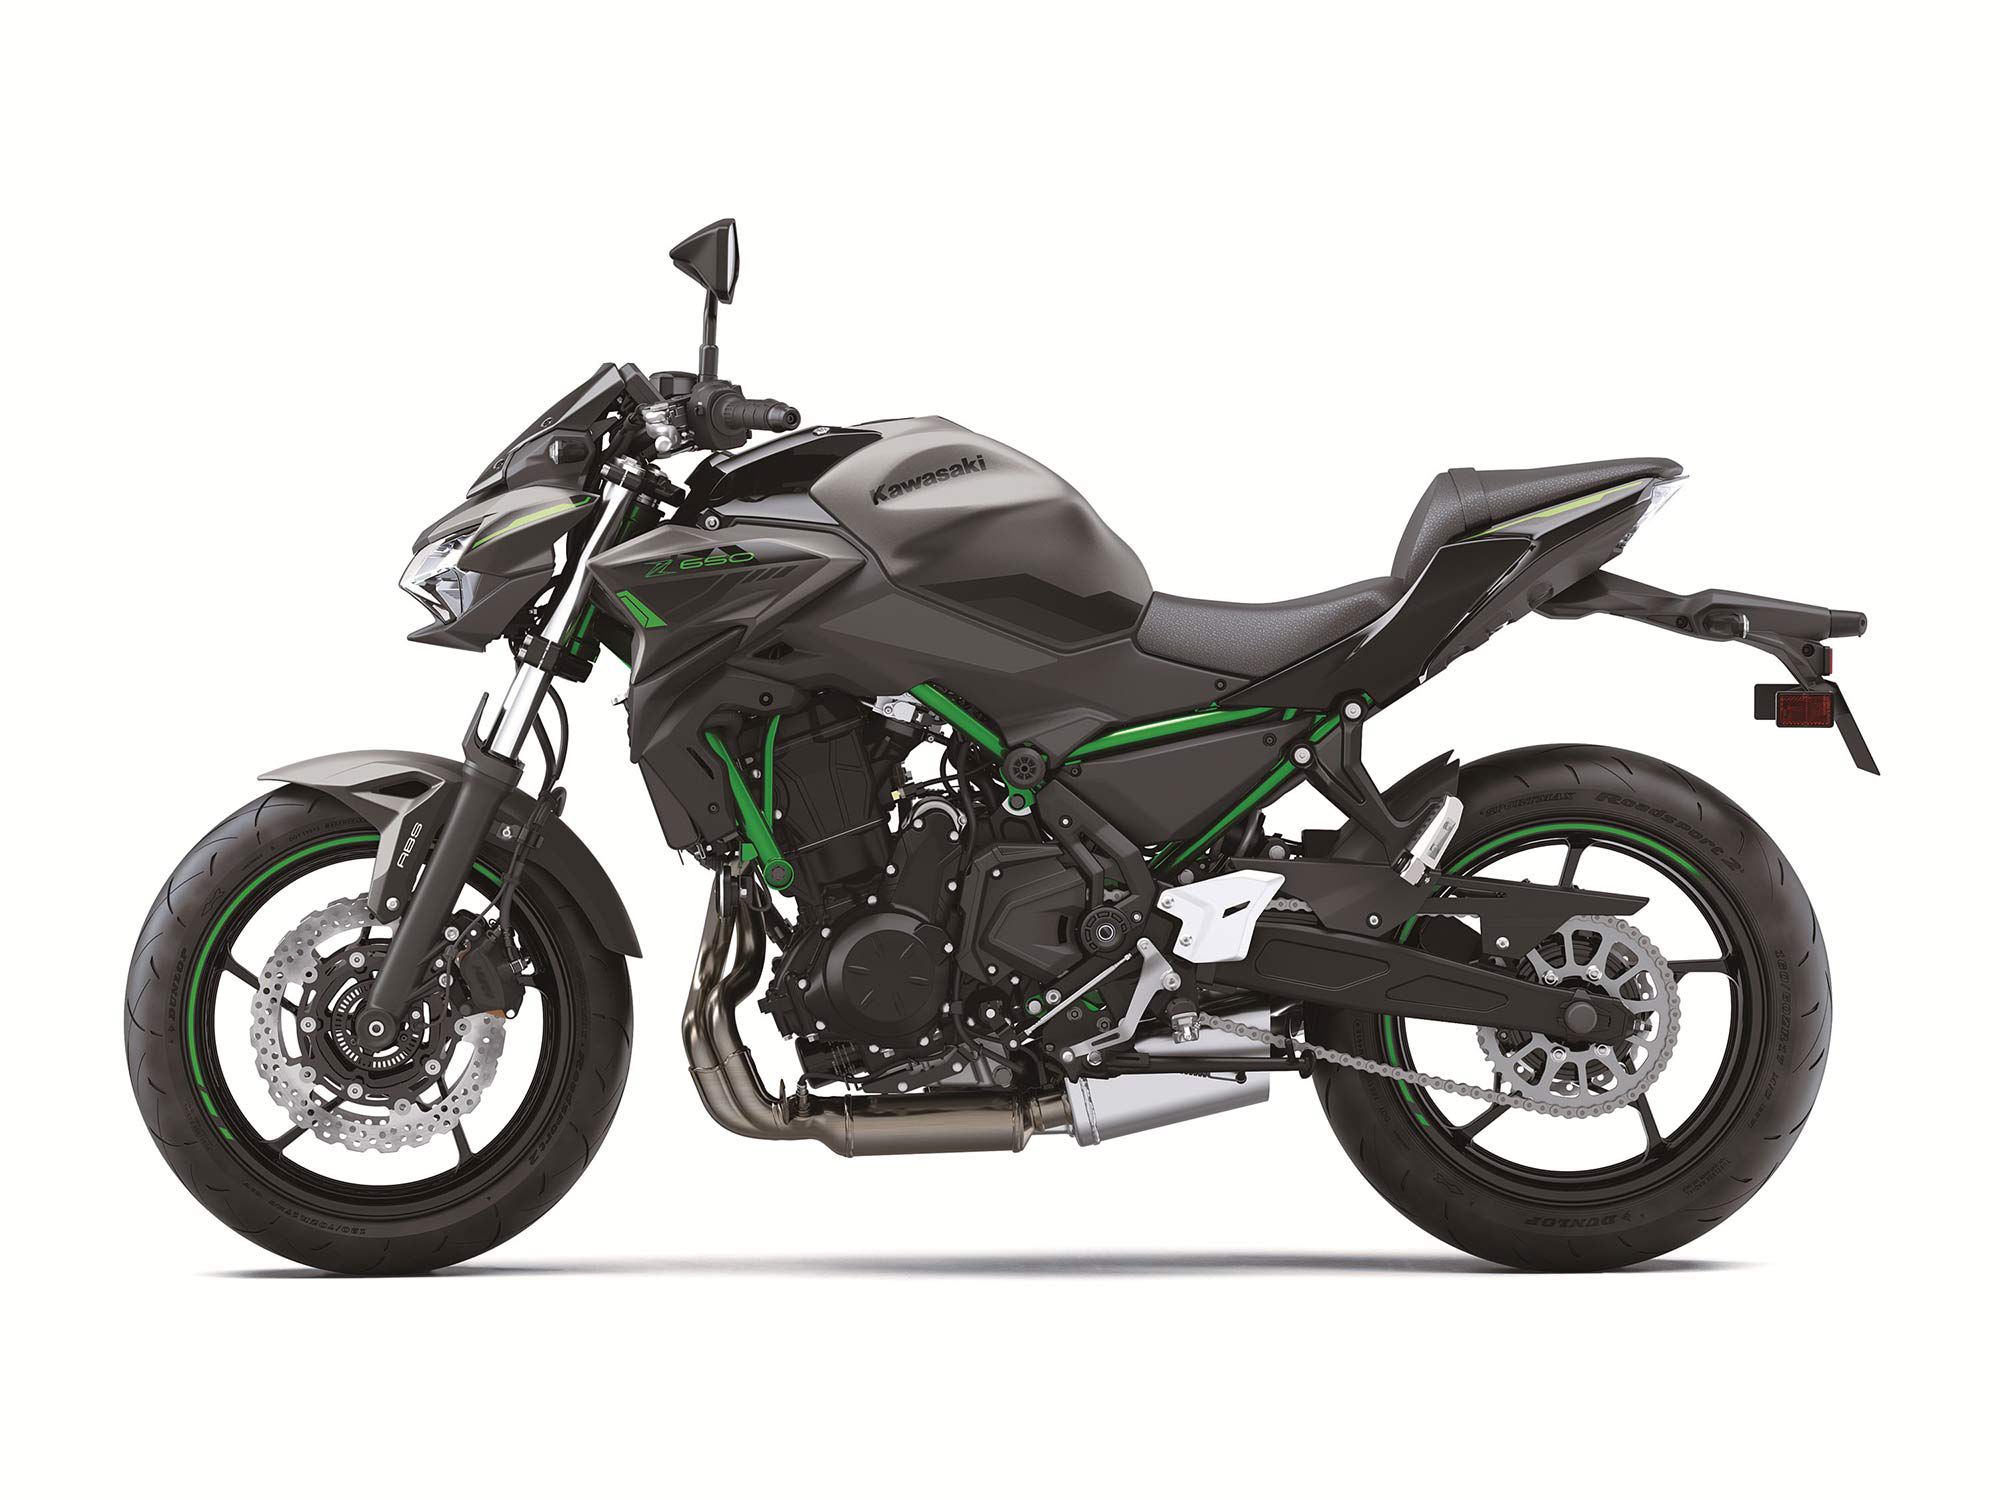 Kawasaki decked the ABS version in the Metallic Matte Graphenesteel Gray/Ebony color for 2023.